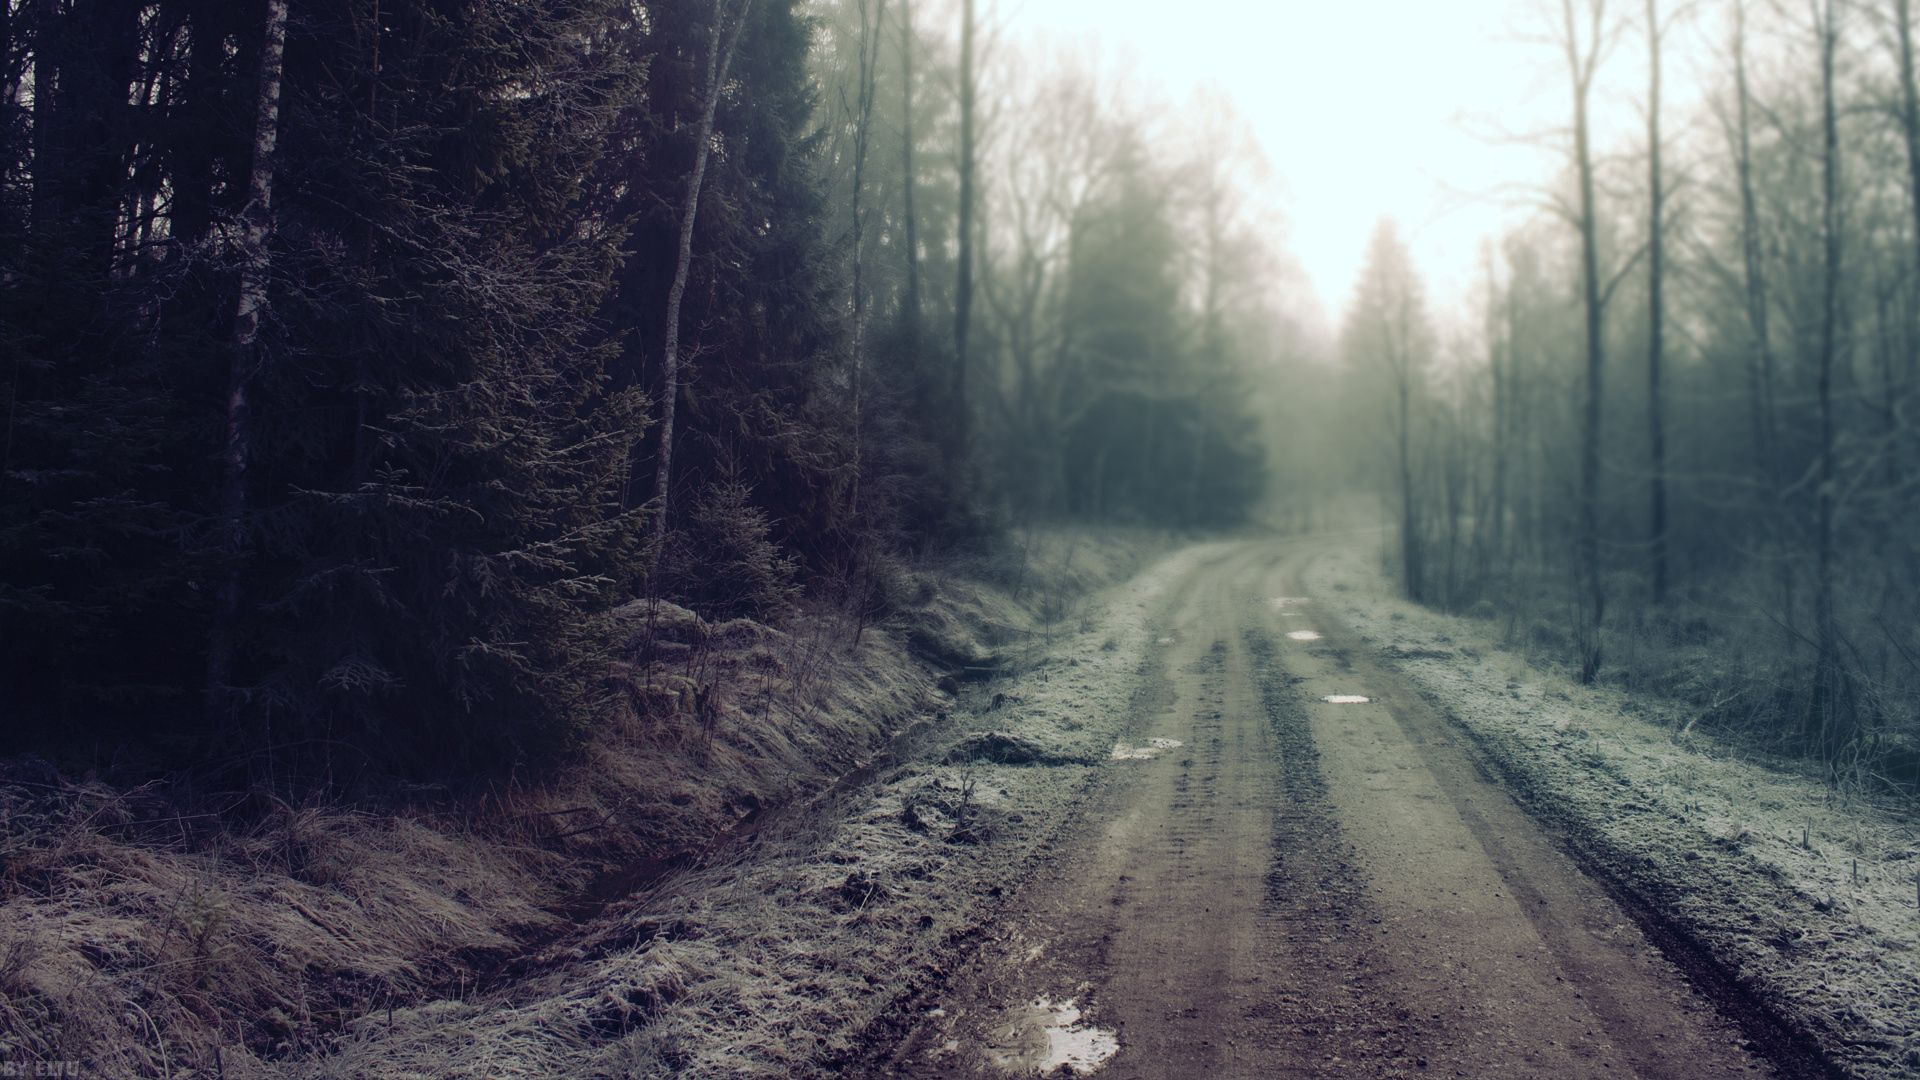 gloomy, nature, road, forest, country, secret, mystery, puddles, countryside